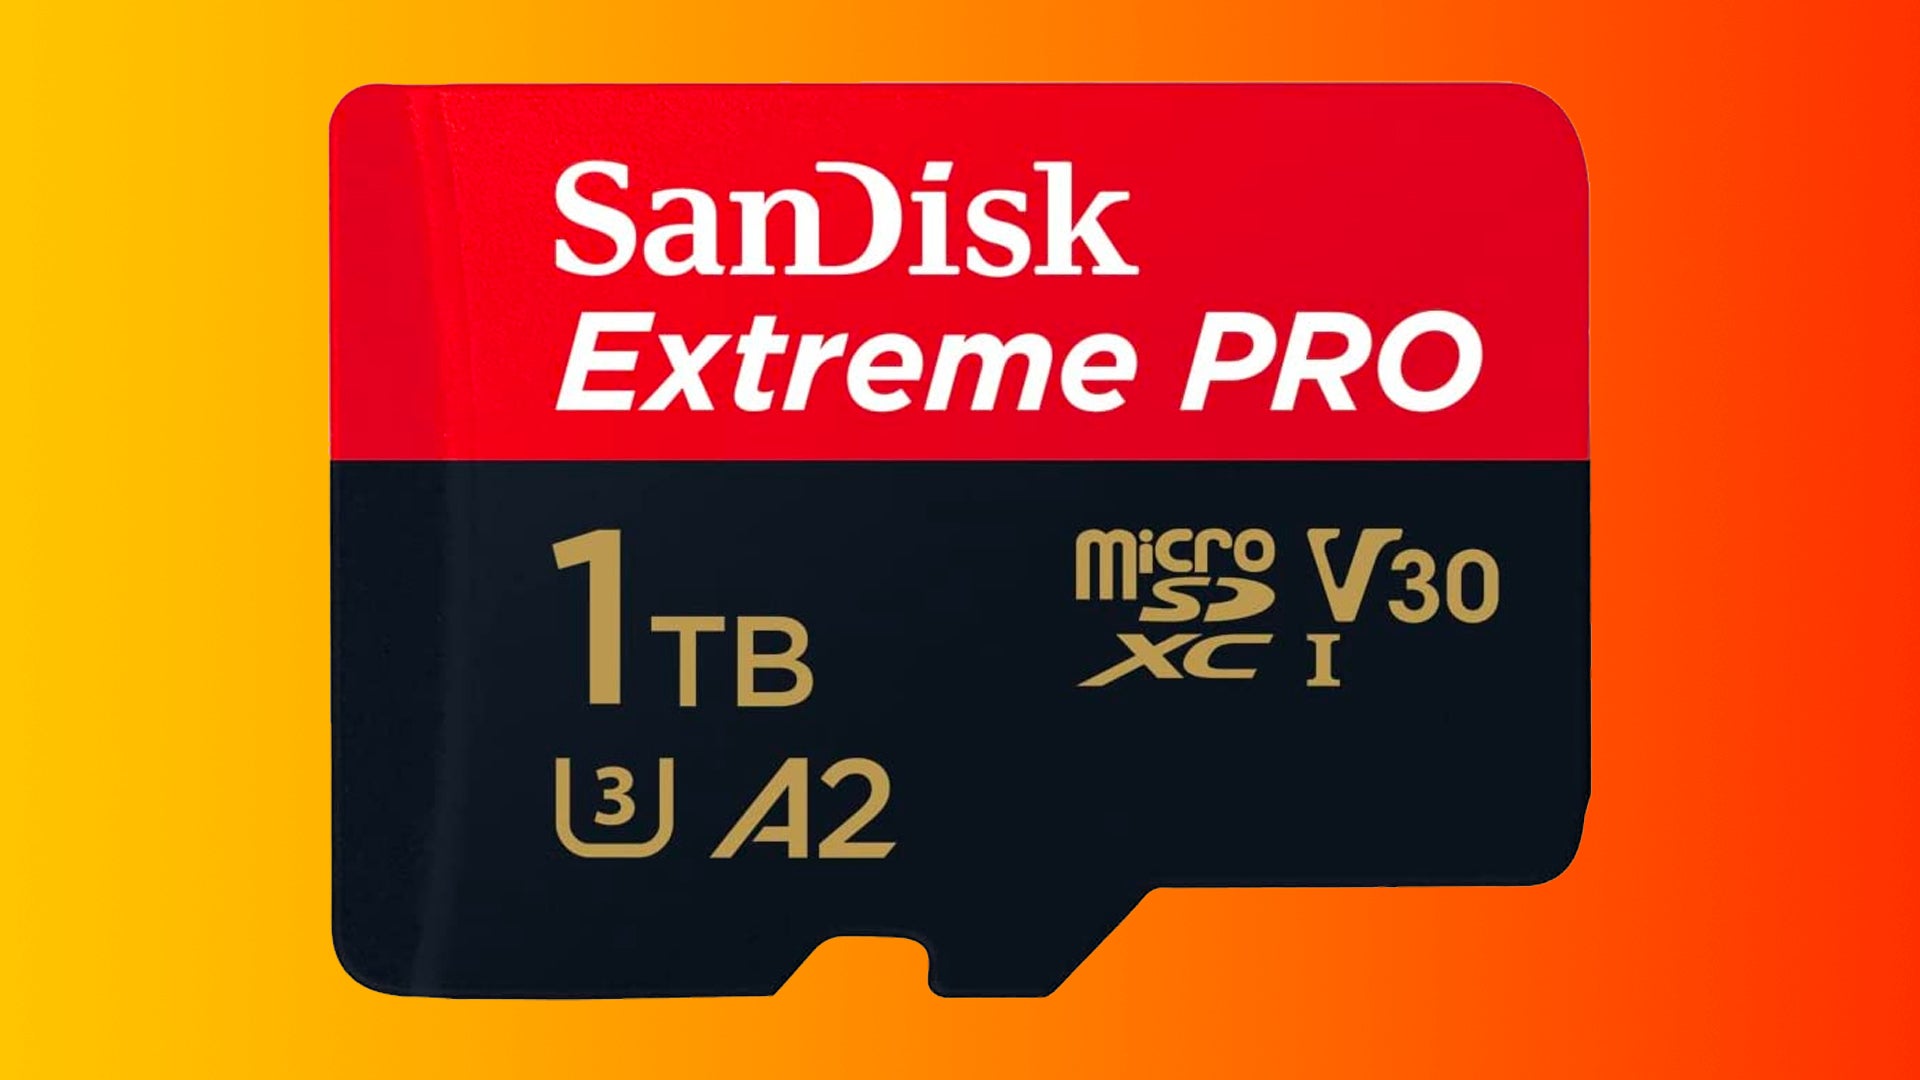 This 1TB SanDisk Extreme Pro MicroSD card is just £129 from Amazon ...